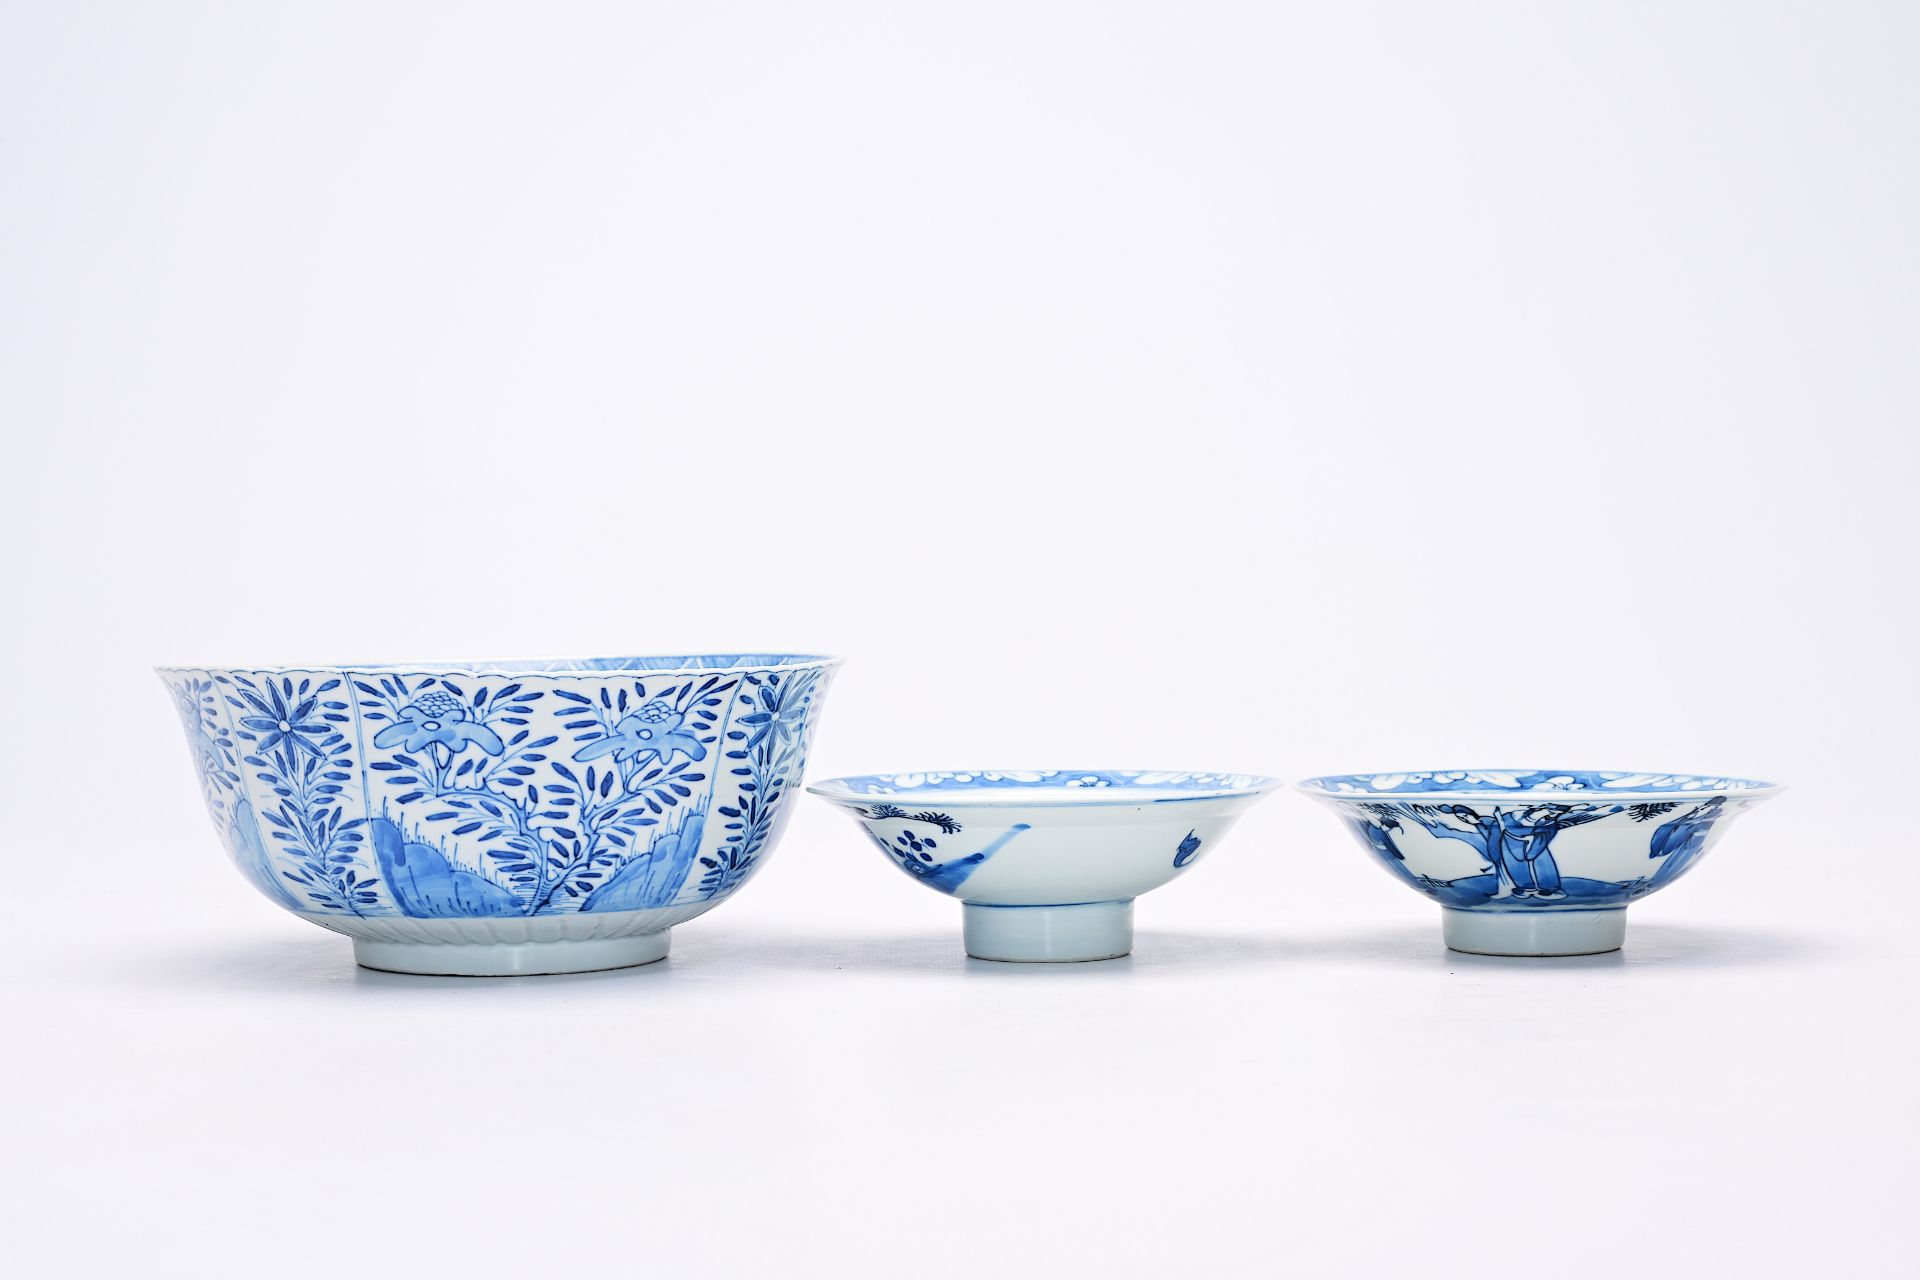 A varied collection of Chinese blue and white porcelain with floral design and figures in a landscap - Image 4 of 22